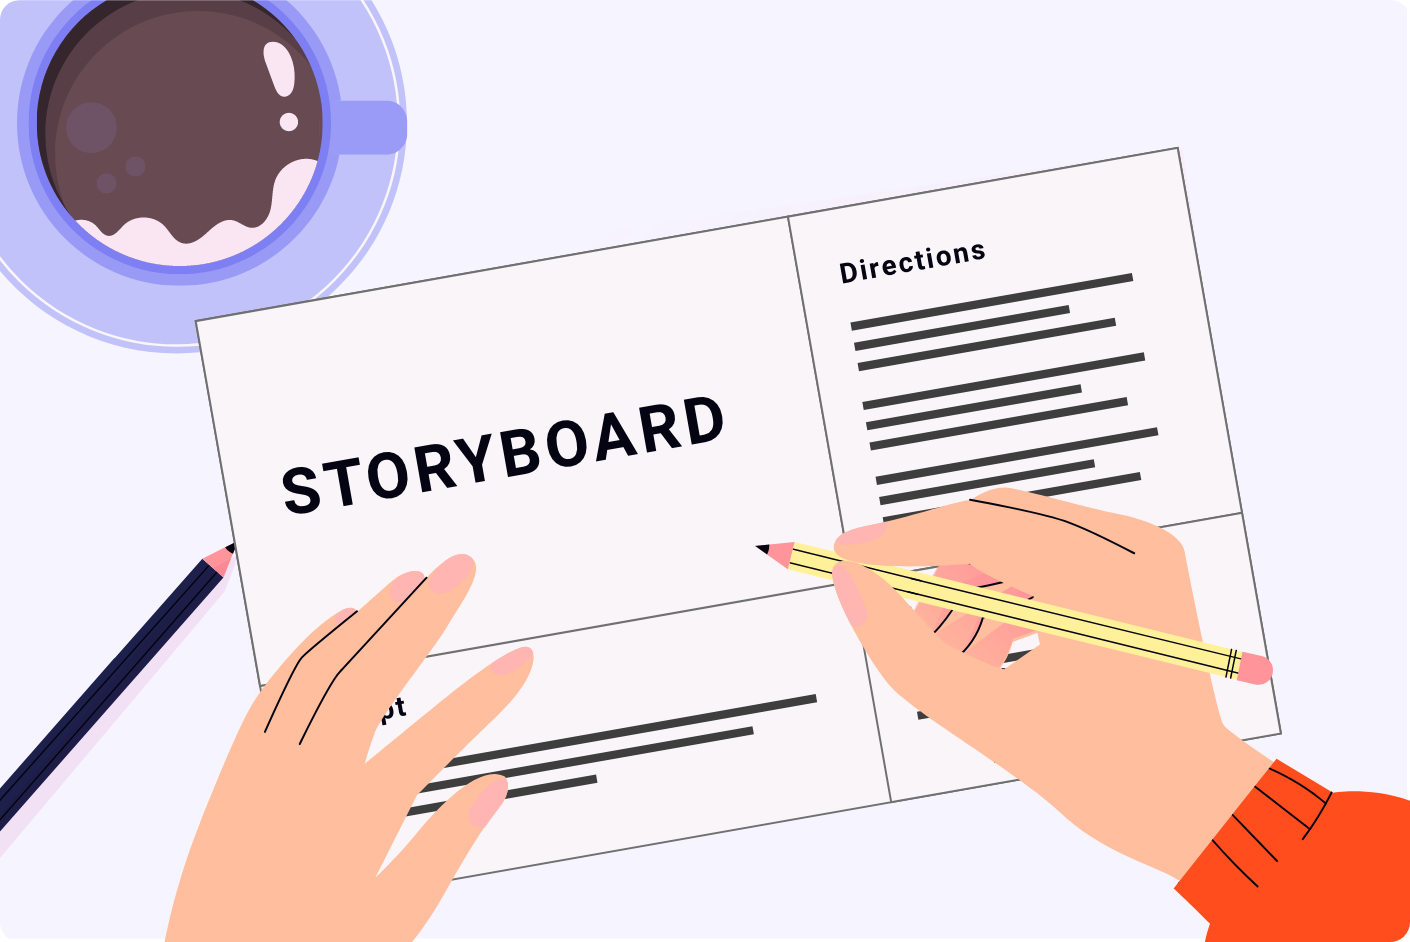 Download our free storyboard explainer video template.